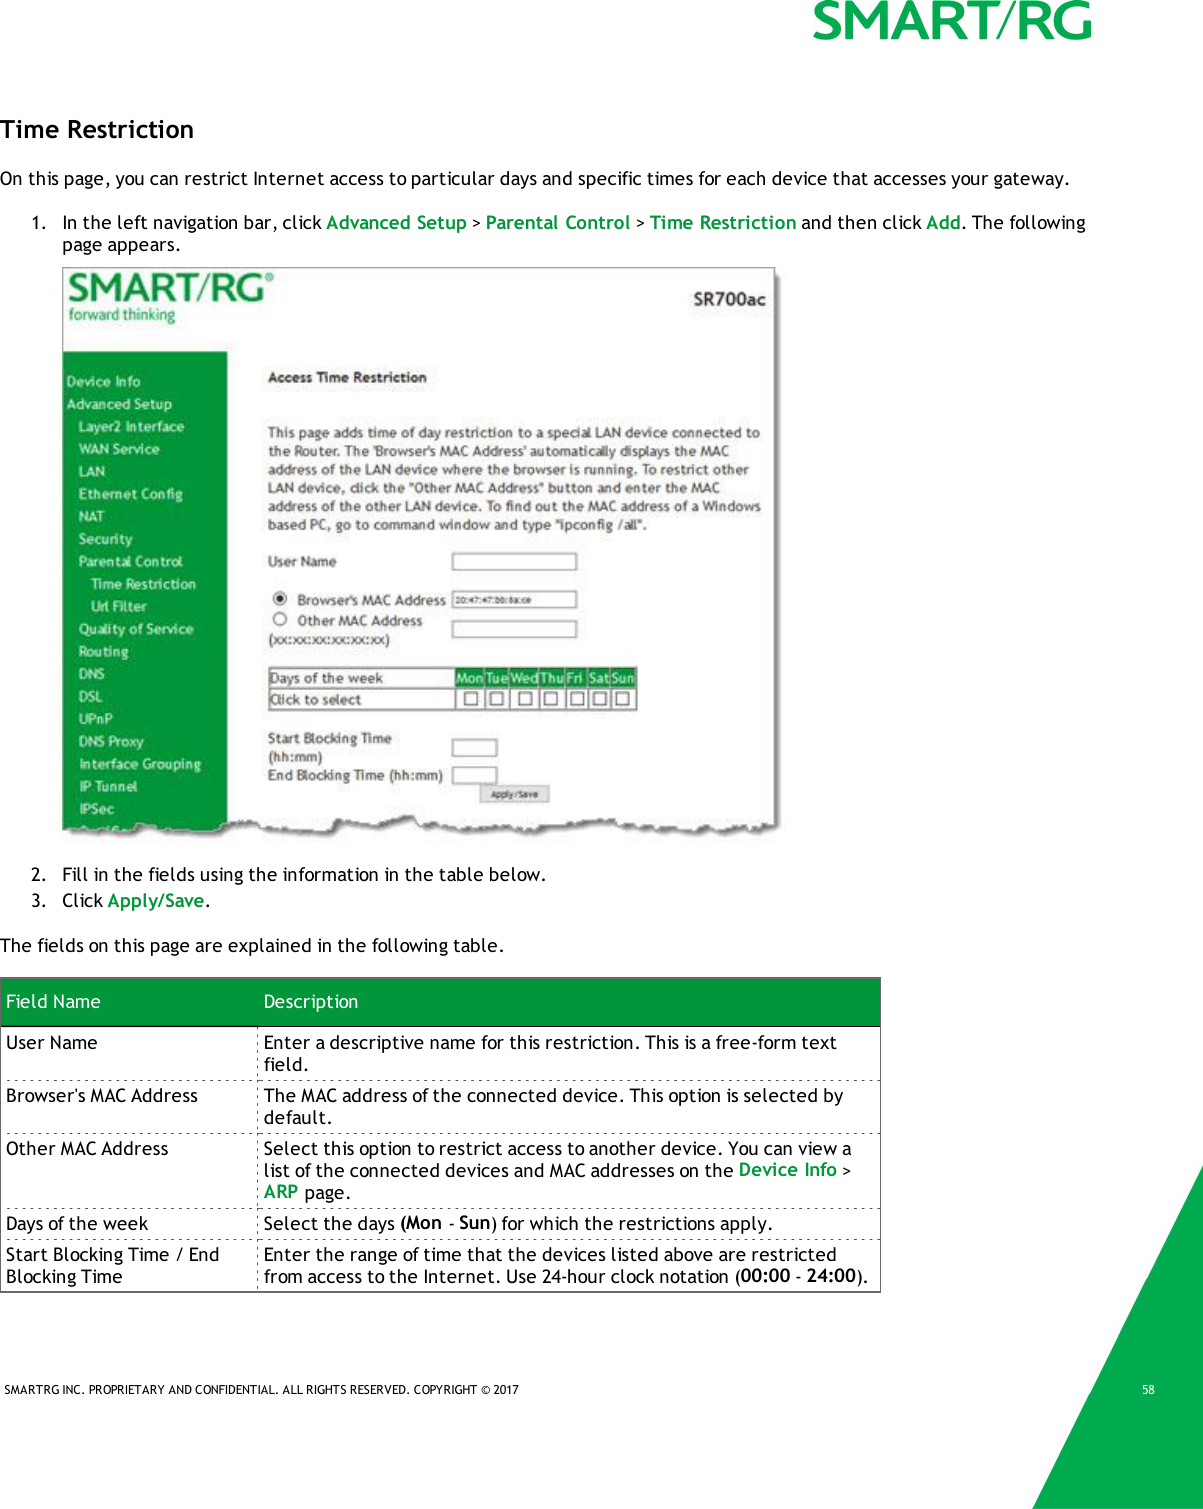 SMARTRG INC. PROPRIETARY AND CONFIDENTIAL. ALL RIGHTS RESERVED. COPYRIGHT © 2017 58Time RestrictionOn this page, you can restrict Internet access to particular days and specific times for each device that accesses your gateway.1. In the left navigation bar, click Advanced Setup &gt;Parental Control &gt;Time Restriction and then click Add. The followingpage appears.2. Fill in the fields using the information in the table below.3. Click Apply/Save.The fields on this page are explained in the following table.Field Name DescriptionUser Name Enter a descriptive name for this restriction. This is a free-form textfield.Browser&apos;s MAC Address The MAC address of the connected device. This option is selected bydefault.Other MAC Address Select this option to restrict access to another device. You can view alist of the connected devices and MAC addresses on the Device Info &gt;ARP page.Days of the week Select the days (Mon -Sun) for which the restrictions apply.Start Blocking Time / EndBlocking TimeEnter the range of time that the devices listed above are restrictedfrom access to the Internet. Use 24-hour clock notation (00:00 -24:00).